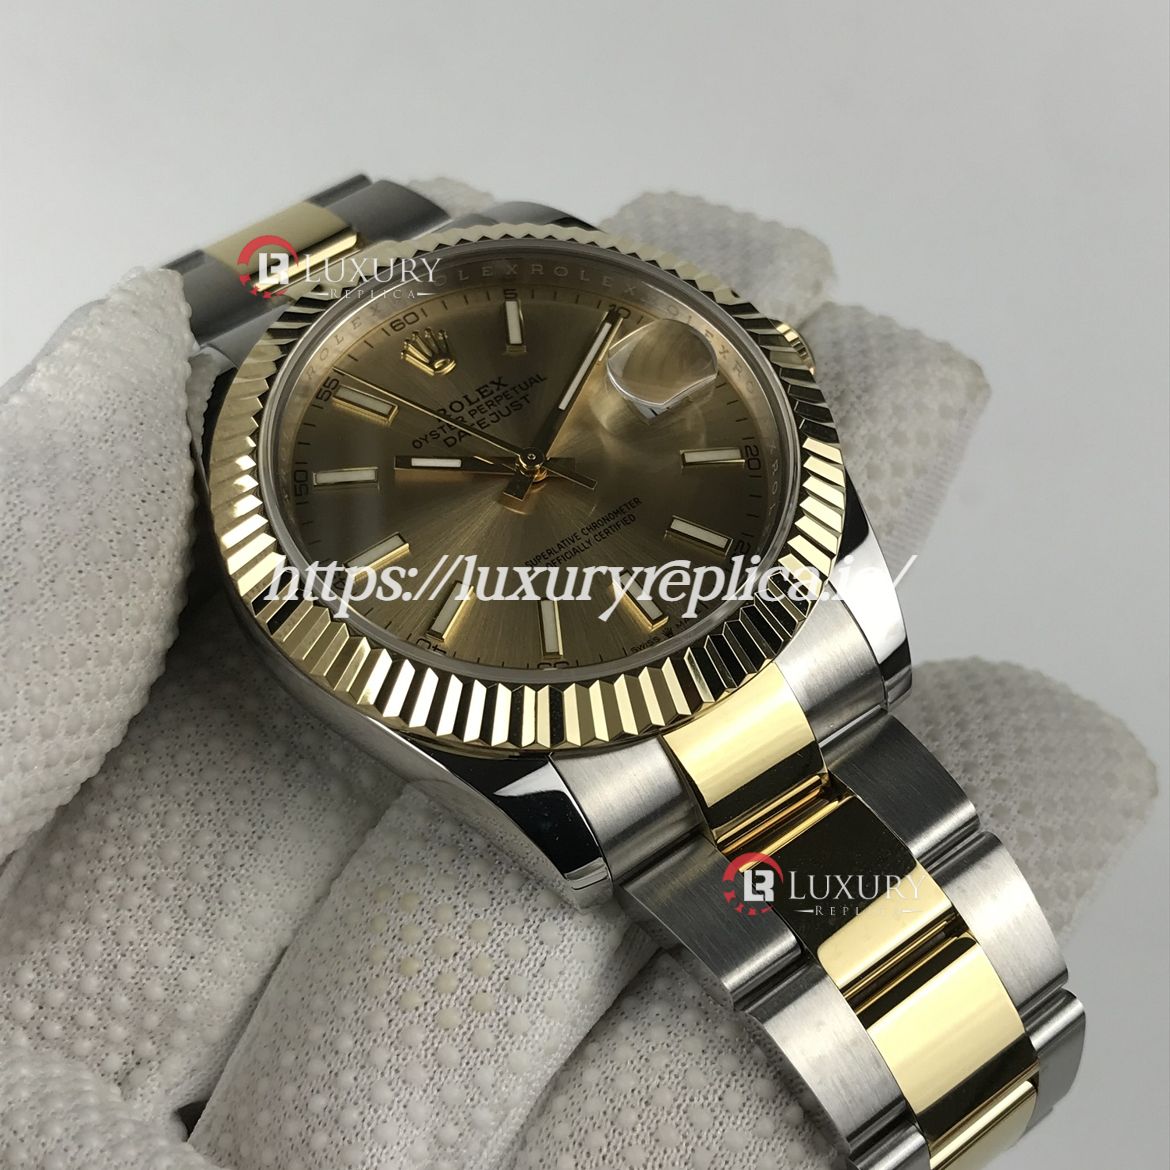 ROLEX DATEJUST II 2 TONE SWISS AUTOMATIC FLUTED BEZEL - OYSTER BRACELET - GOLD DIAL - STICK MARKERS